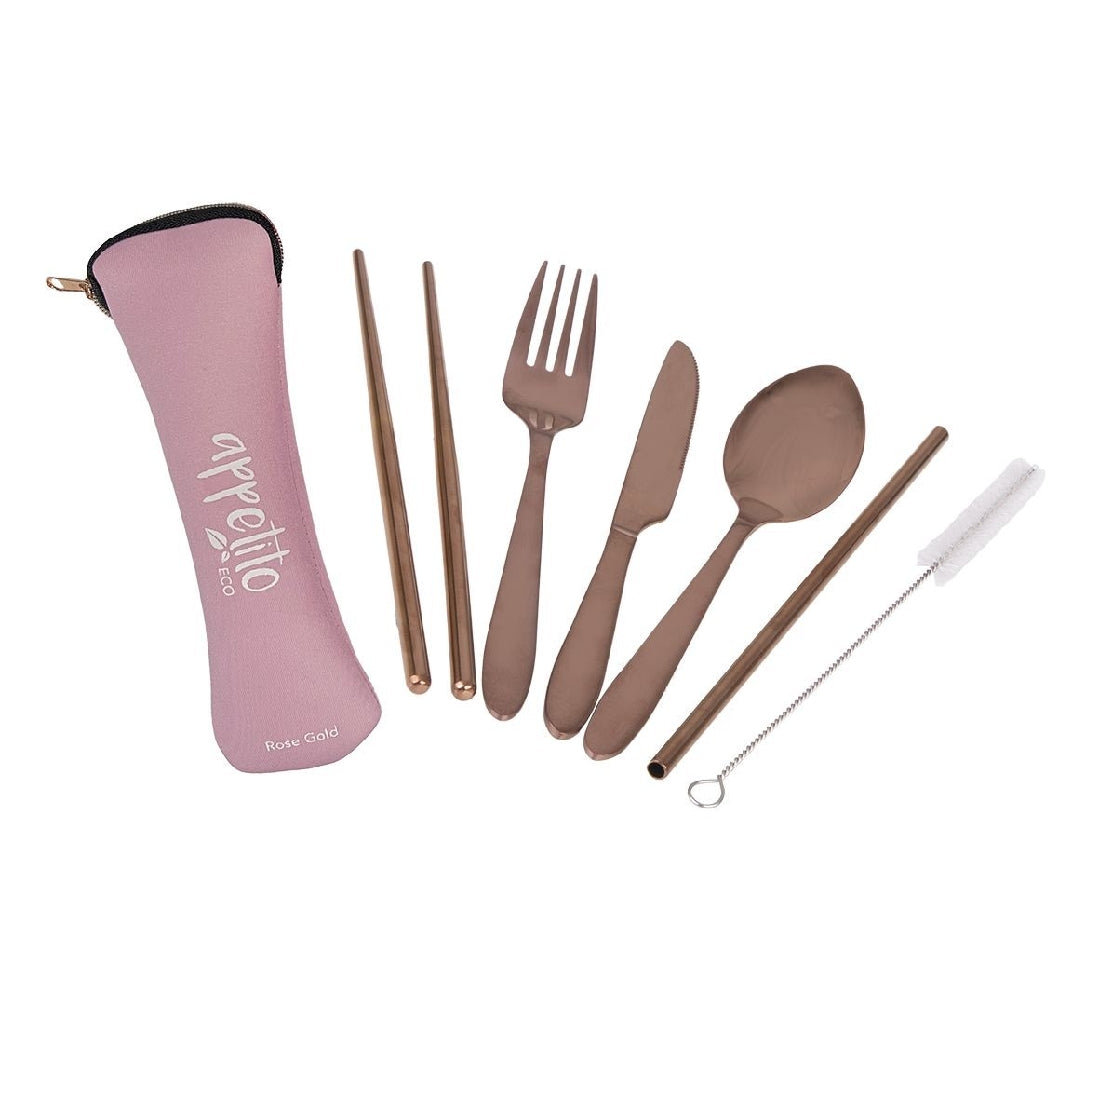 Appetito 6 Piece Stainless Steel Traveller's Cutlery Set - Rose Gold